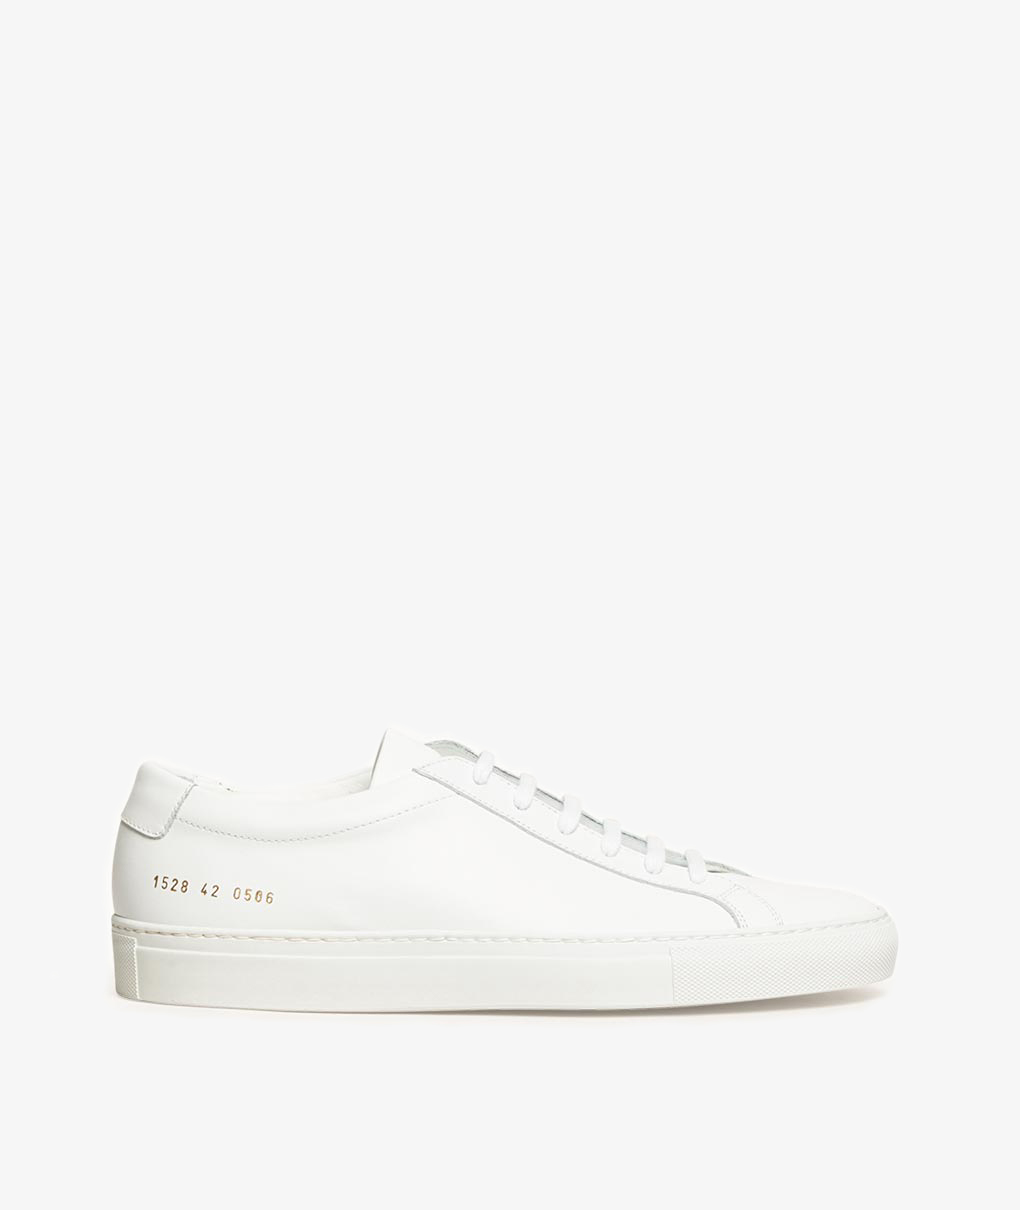 Norse Store | Shipping Worldwide - Common Projects Original